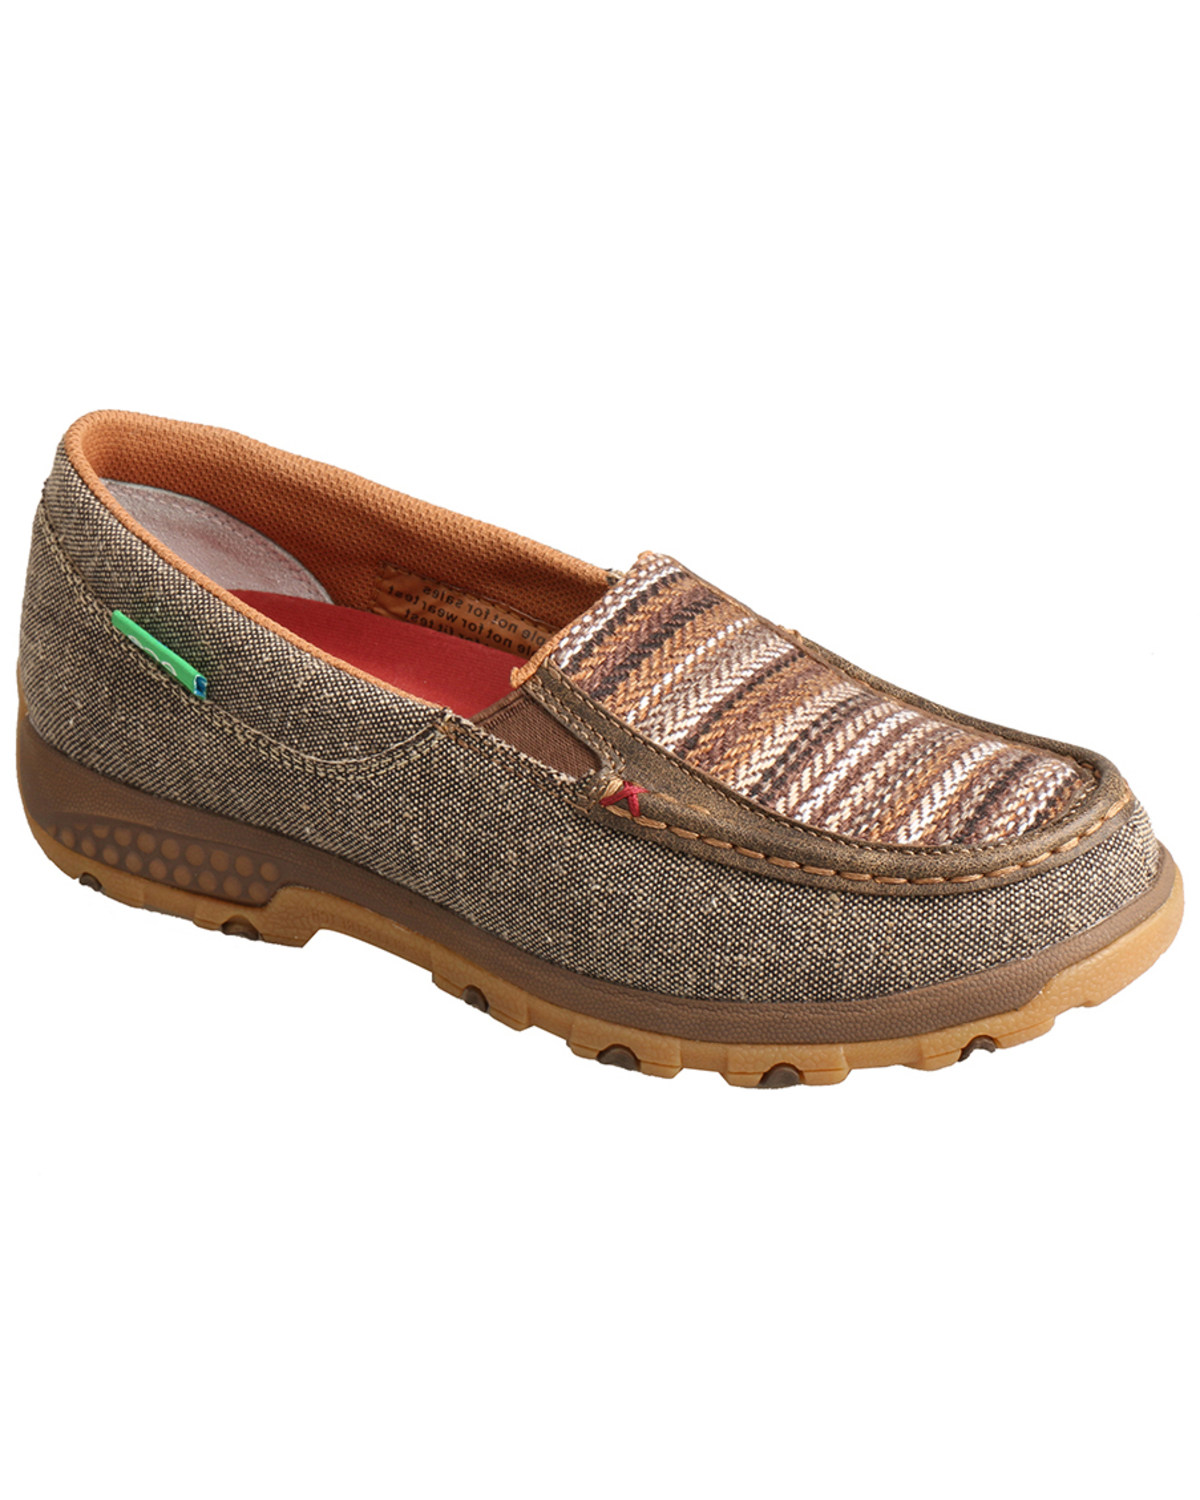 Twisted X Women's Slip-On CellStretch Driving Shoes - Moc Toe